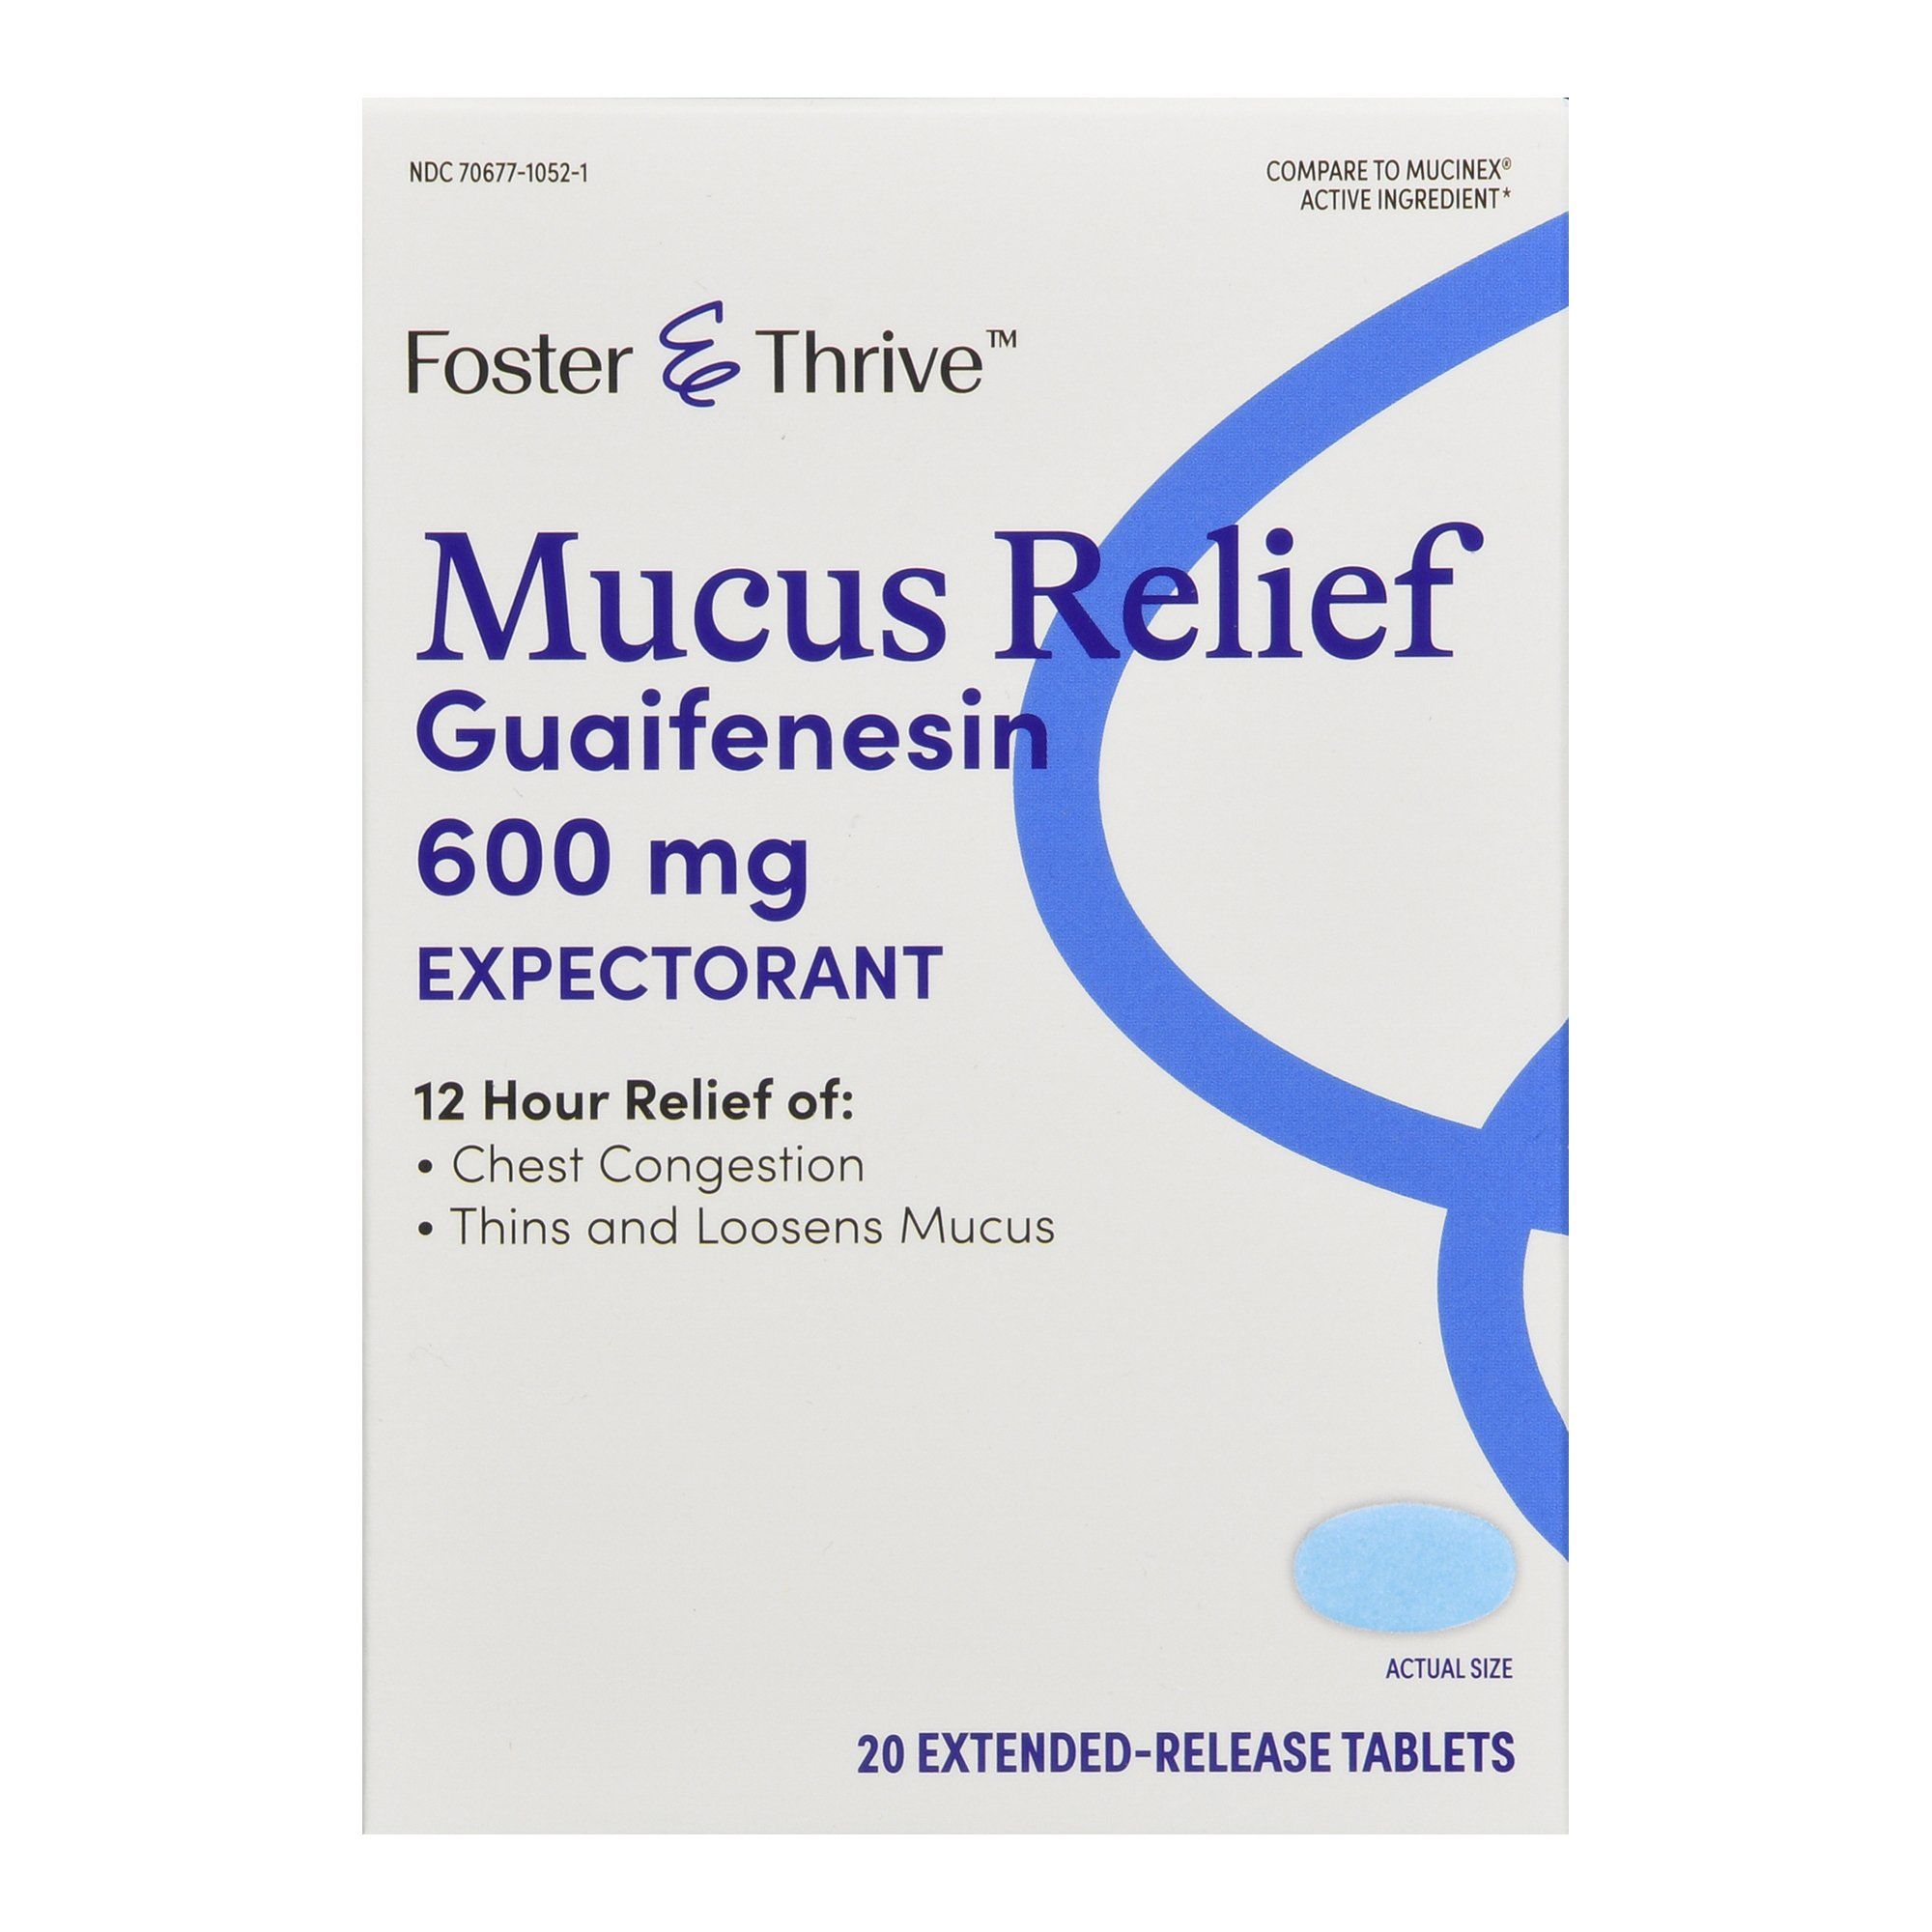 Foster & Thrive Mucus Relief Guaifenesin Extended-Release Tablets, 600 mg - 20 ct